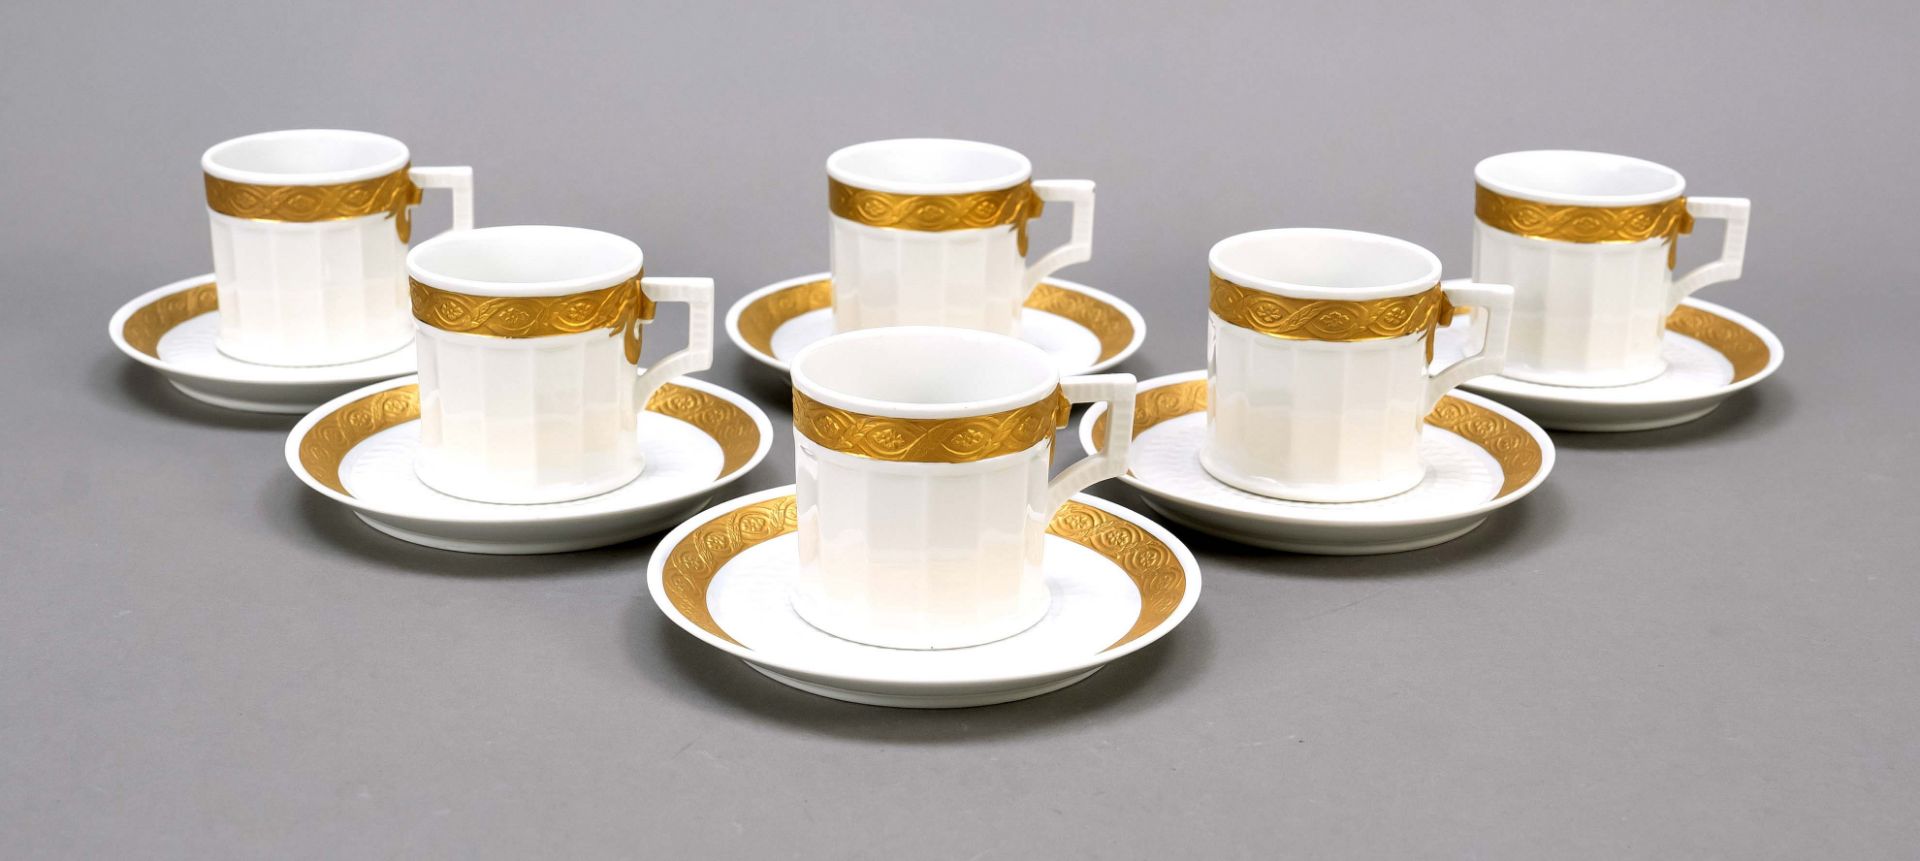 Six cups with saucers, Royal Copenhagen, Denmark, marks 1969-79, classicistic form, design Arnold